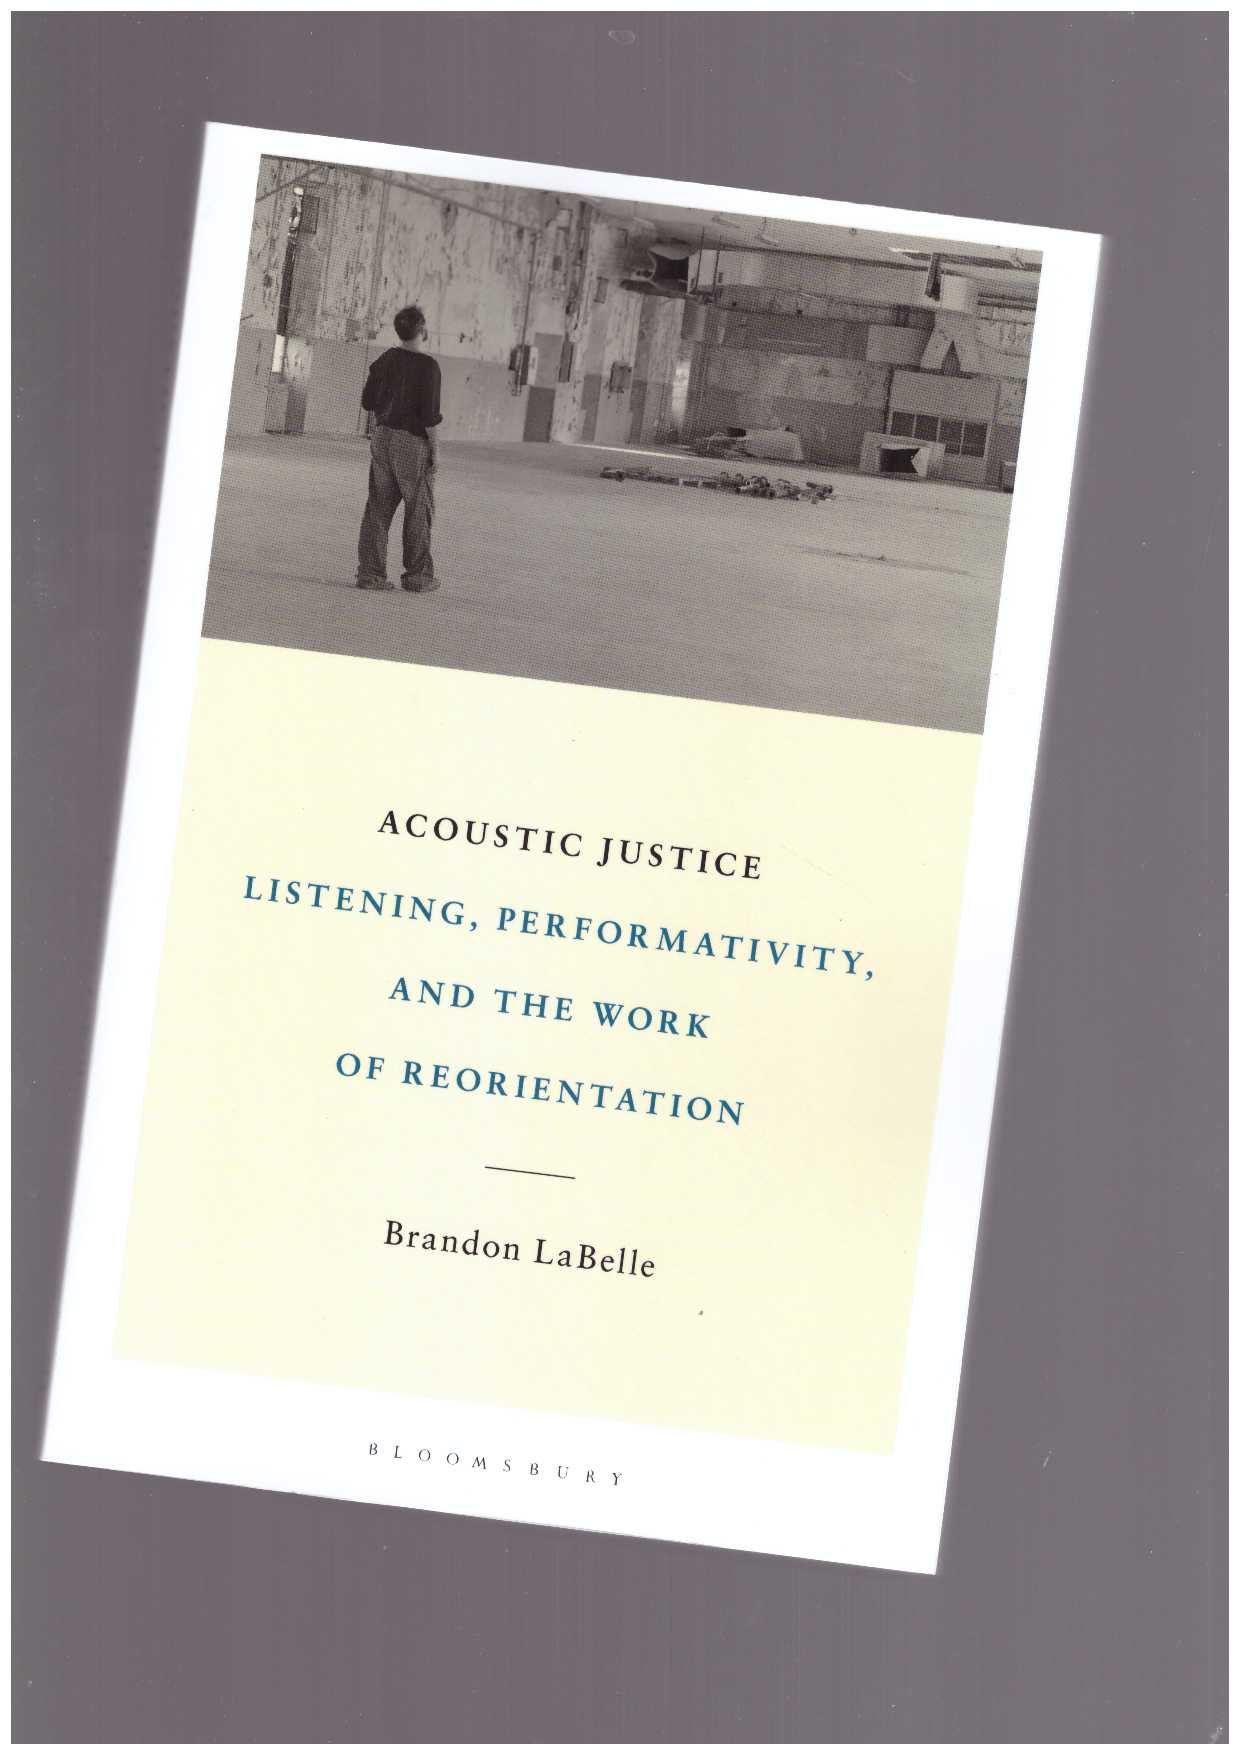 LABELLE, Brandon - Acoustic Justice. Listening, Performativity, and the Work of Reorientation